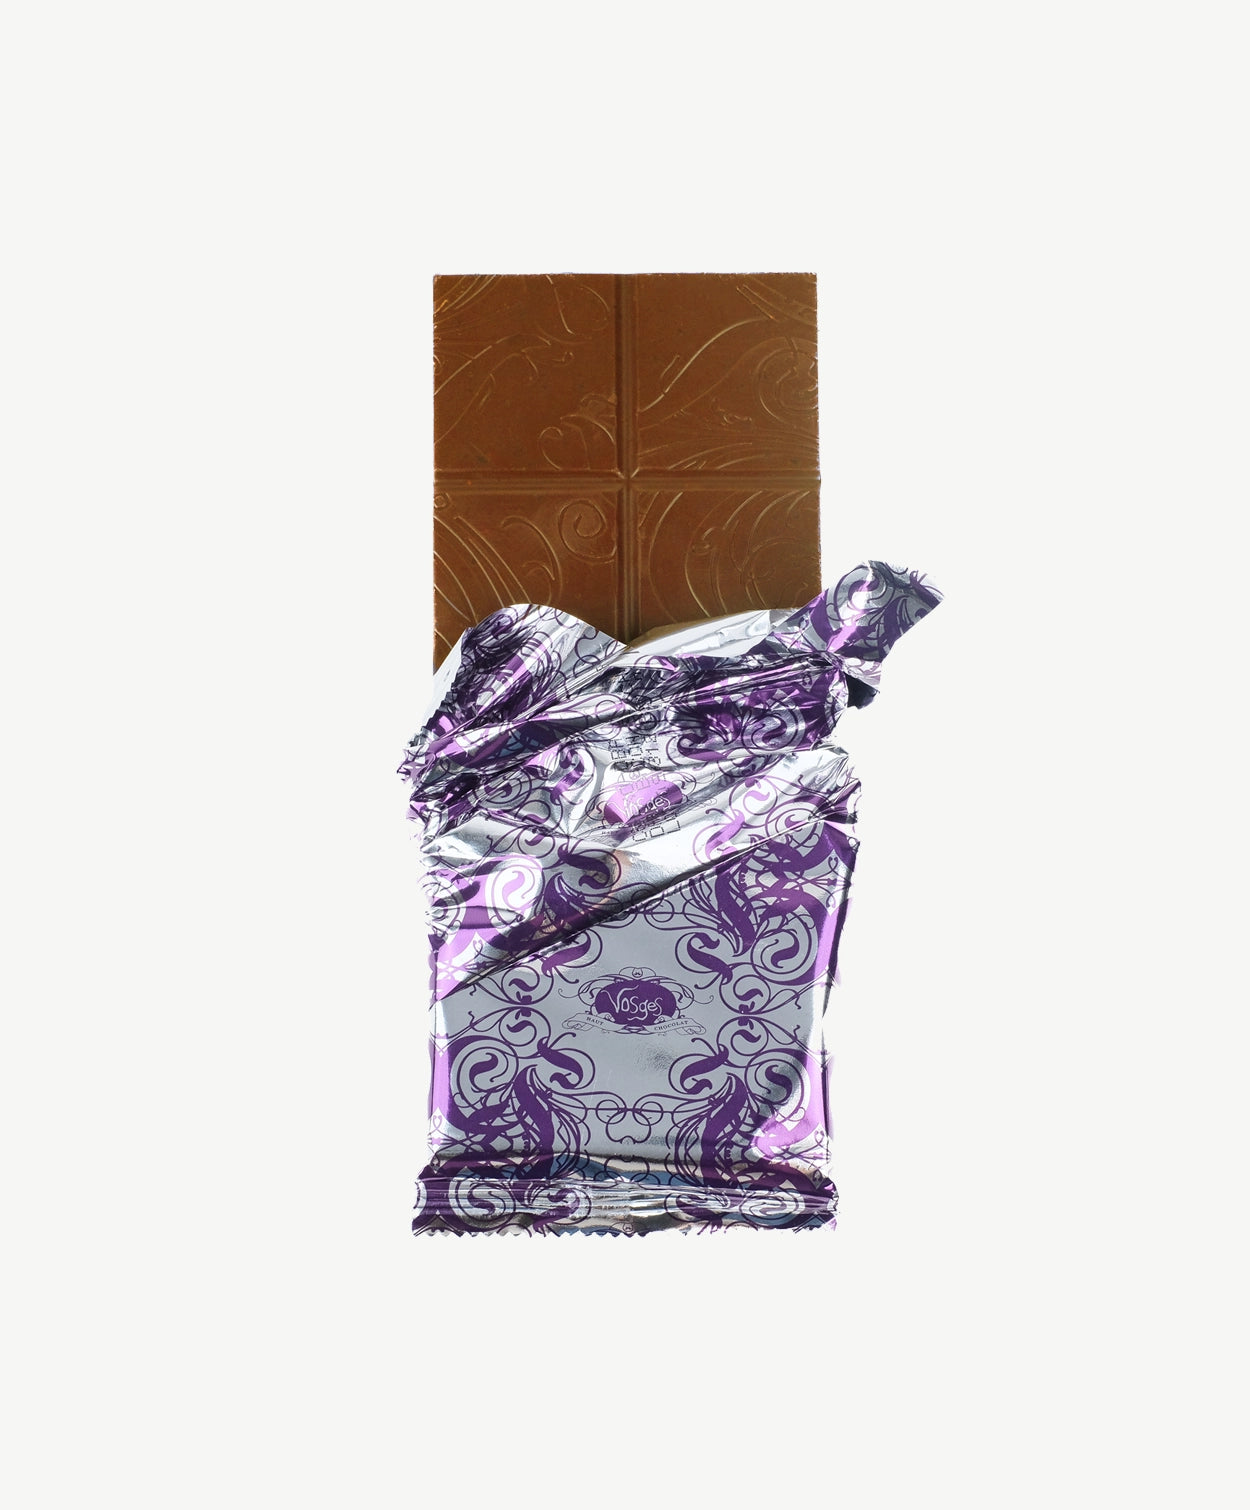 Unwrapped Vosges Mo's Milk Chocolate Bacon Bar in a silver wrapper stands upright on a white background.